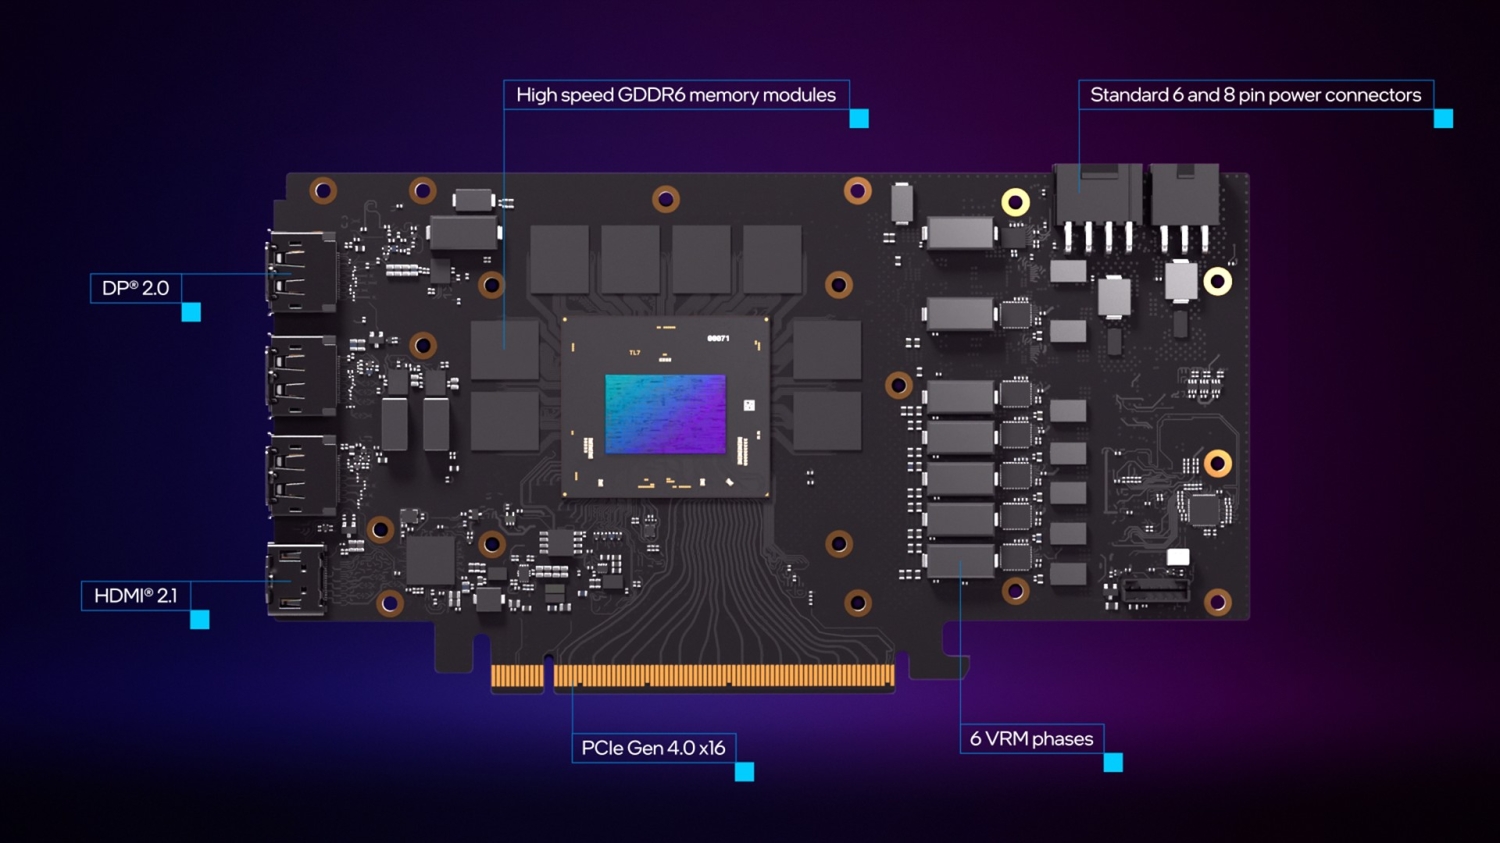 Custom Intel Arc A770 and A750 graphics cards have been revealed